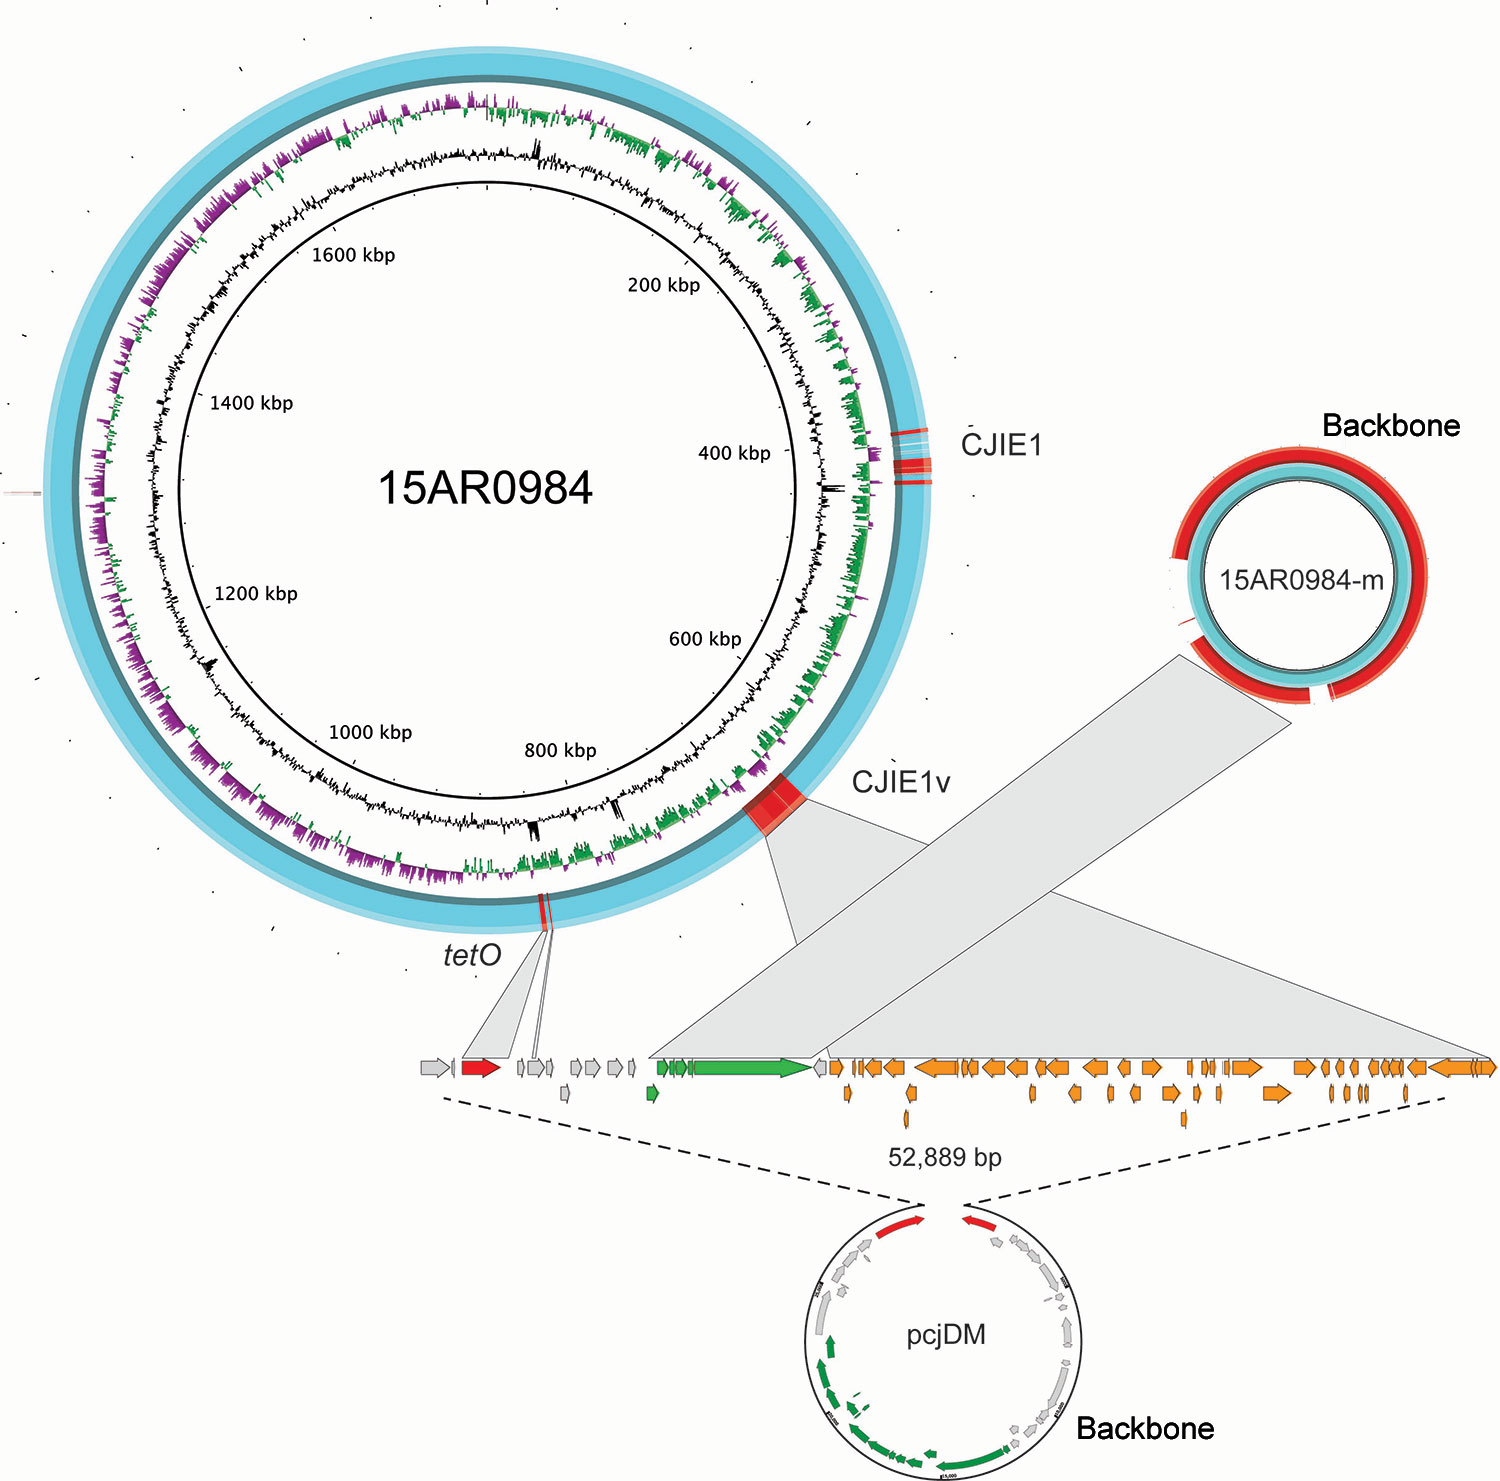 Genome structures of the complete Campylobacter jejuni strain 15AR0984 chromosome and plasmid (15AR0984-m) isolated from humans and poultry, New Zealand, 2014–2016, compared with the closest plasmid (pcjDM) sequence found in GenBank. High-scoring segment pairs between the 15AR0984 genome and the plasmid pcjDM ware connected with gray bars to illustrate the similar shared regions except for the backbone regions, which were highly conserved across the pTet-like plasmid genomes.